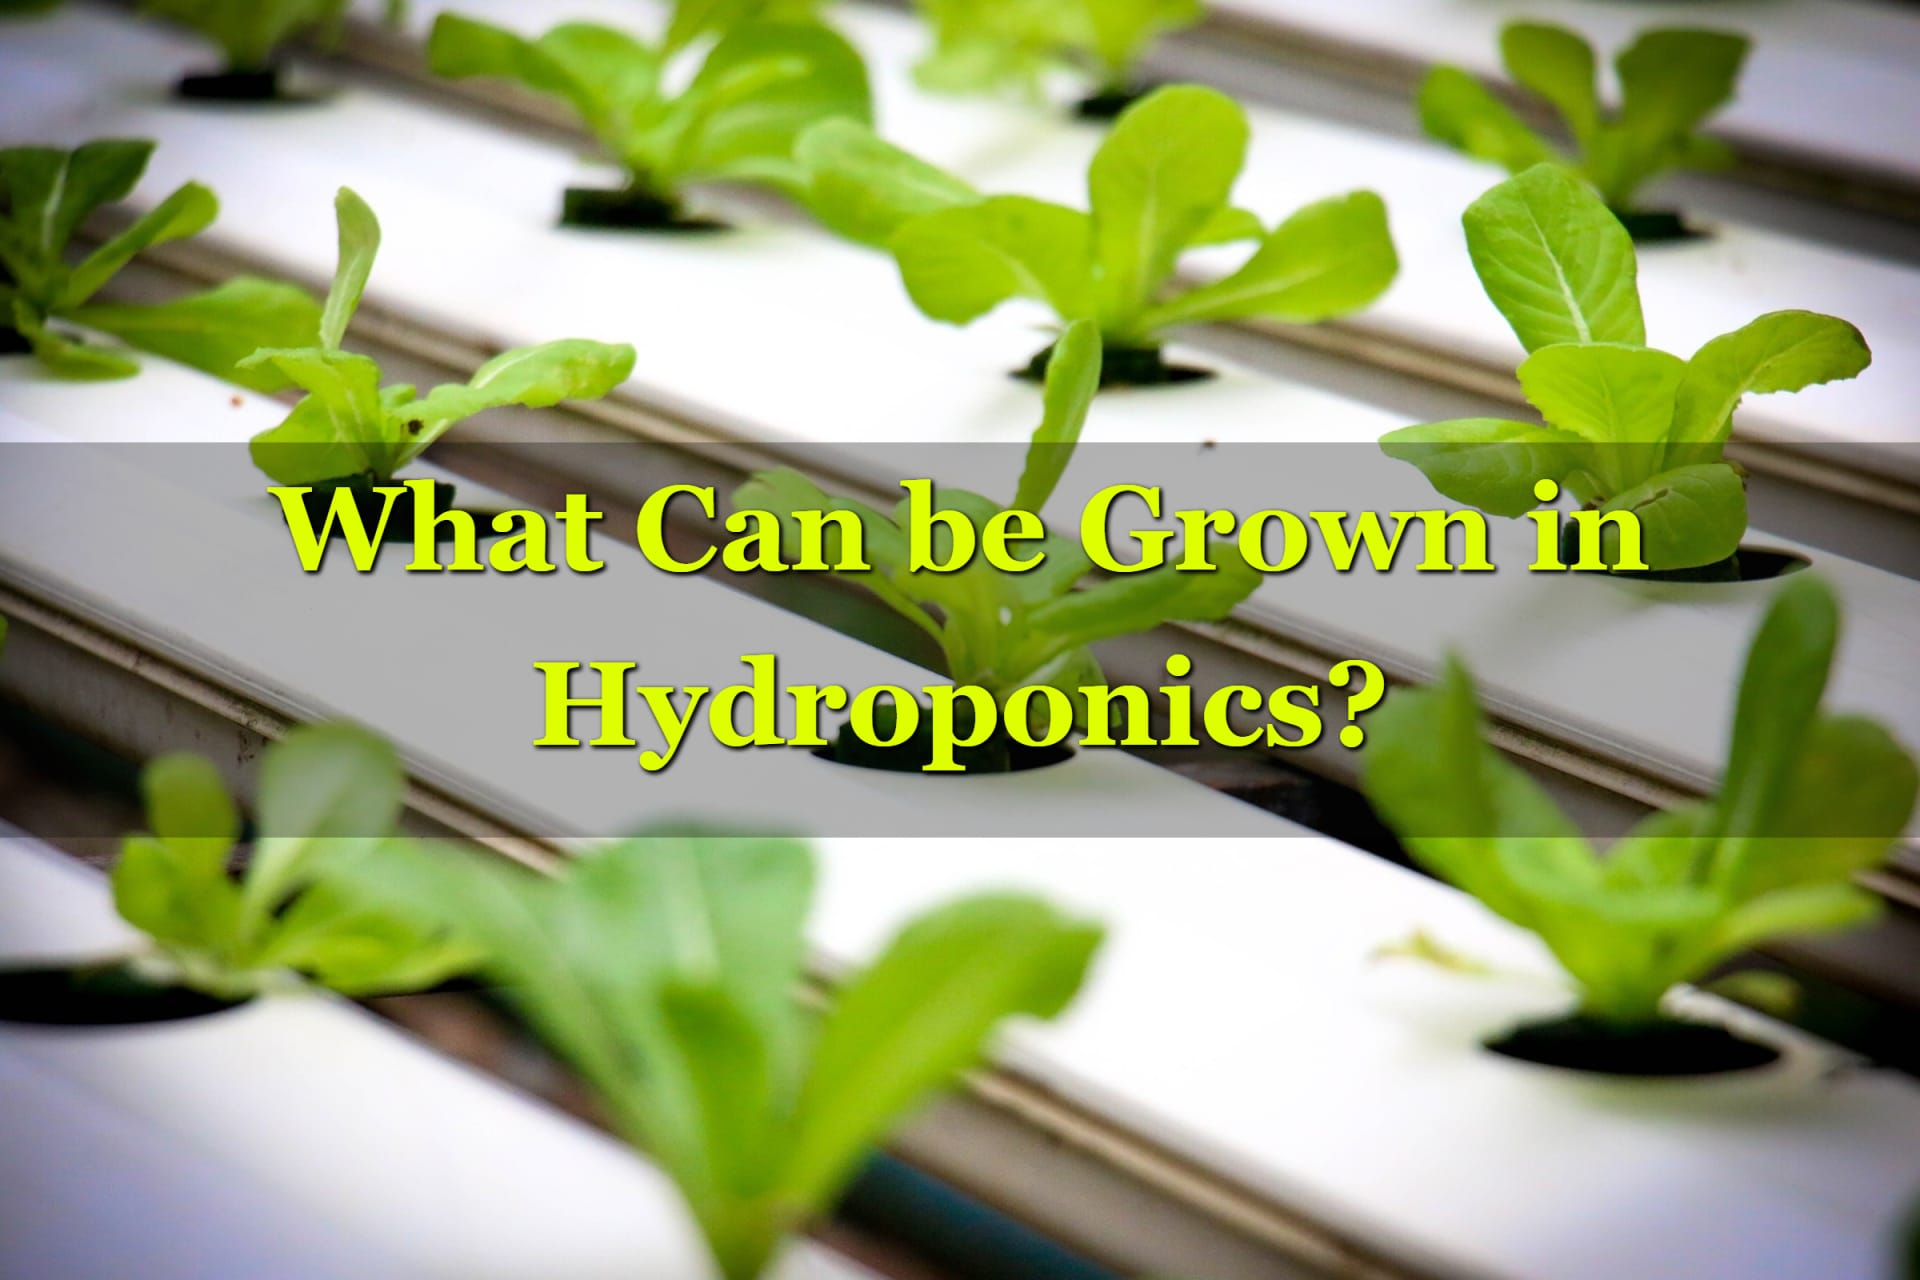 What Can Be Grown in Hydroponics?